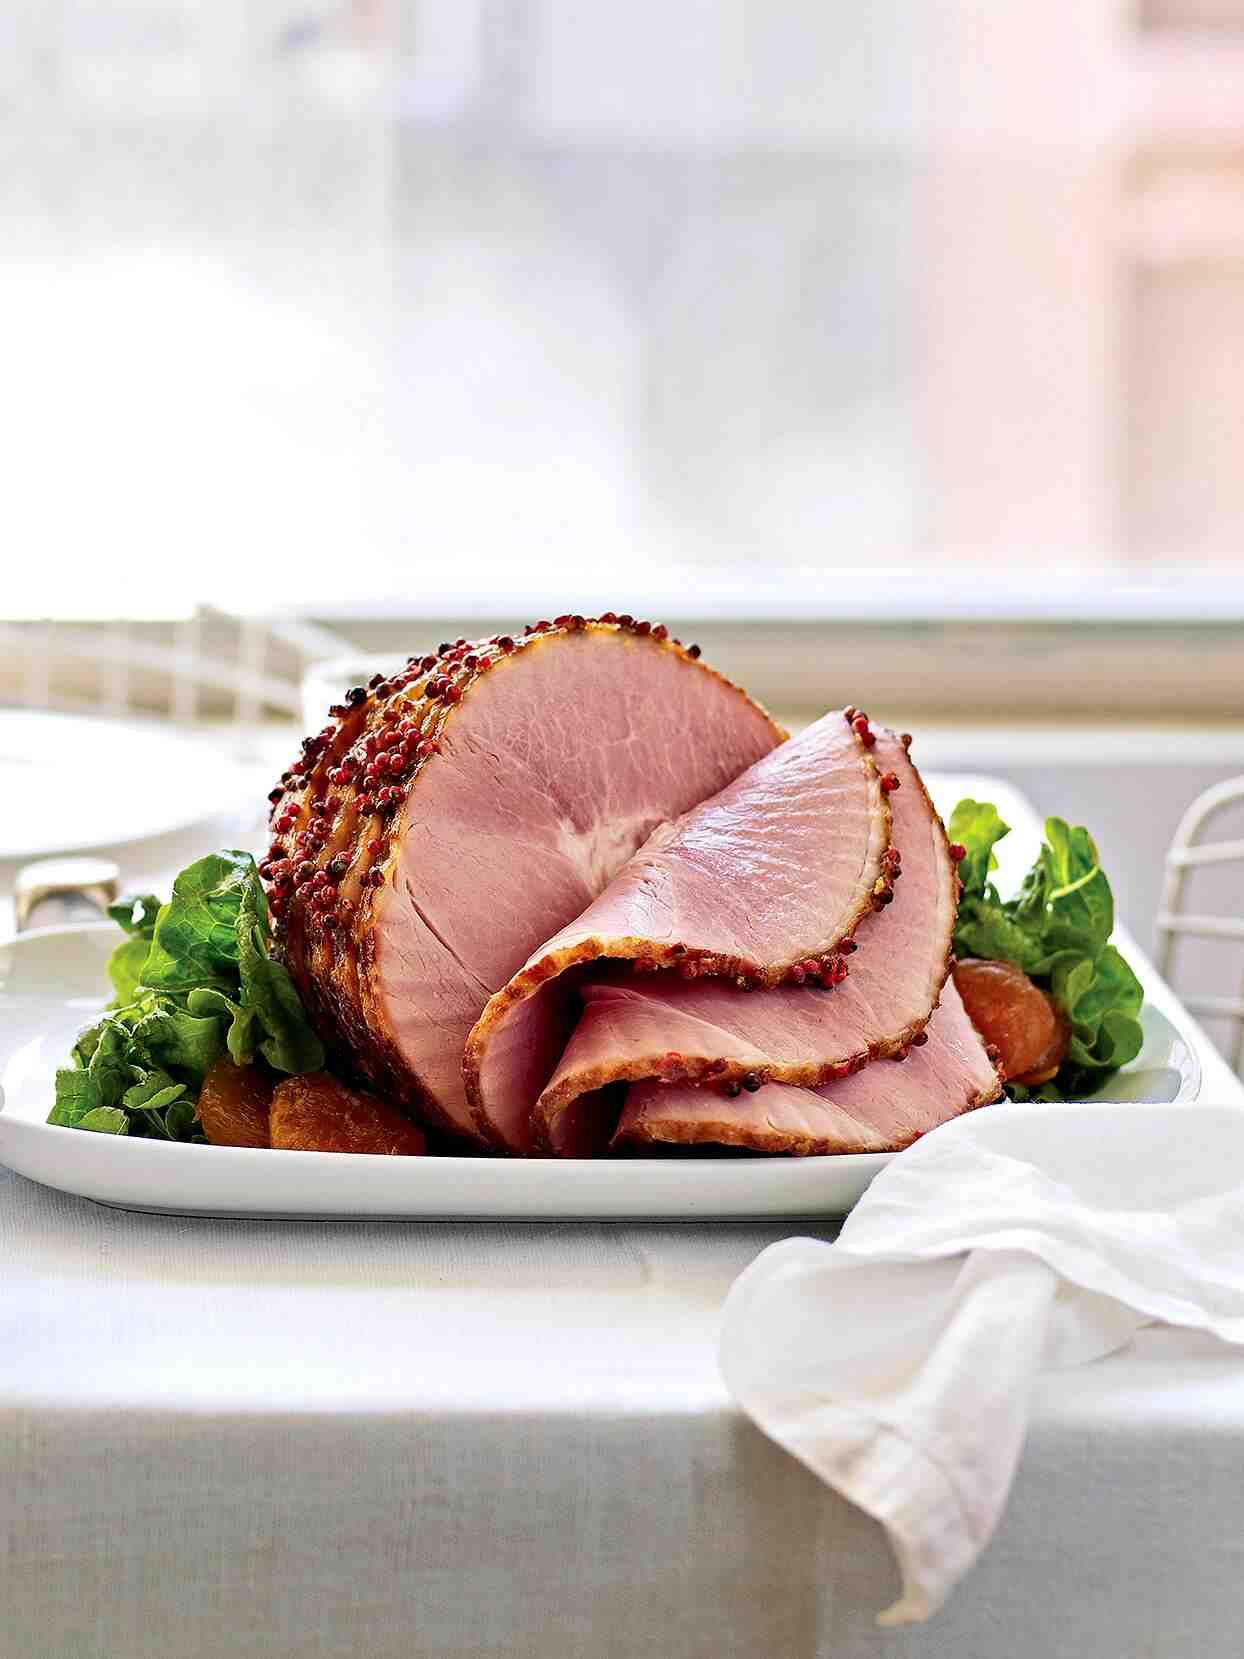 Why is ham different than pork?